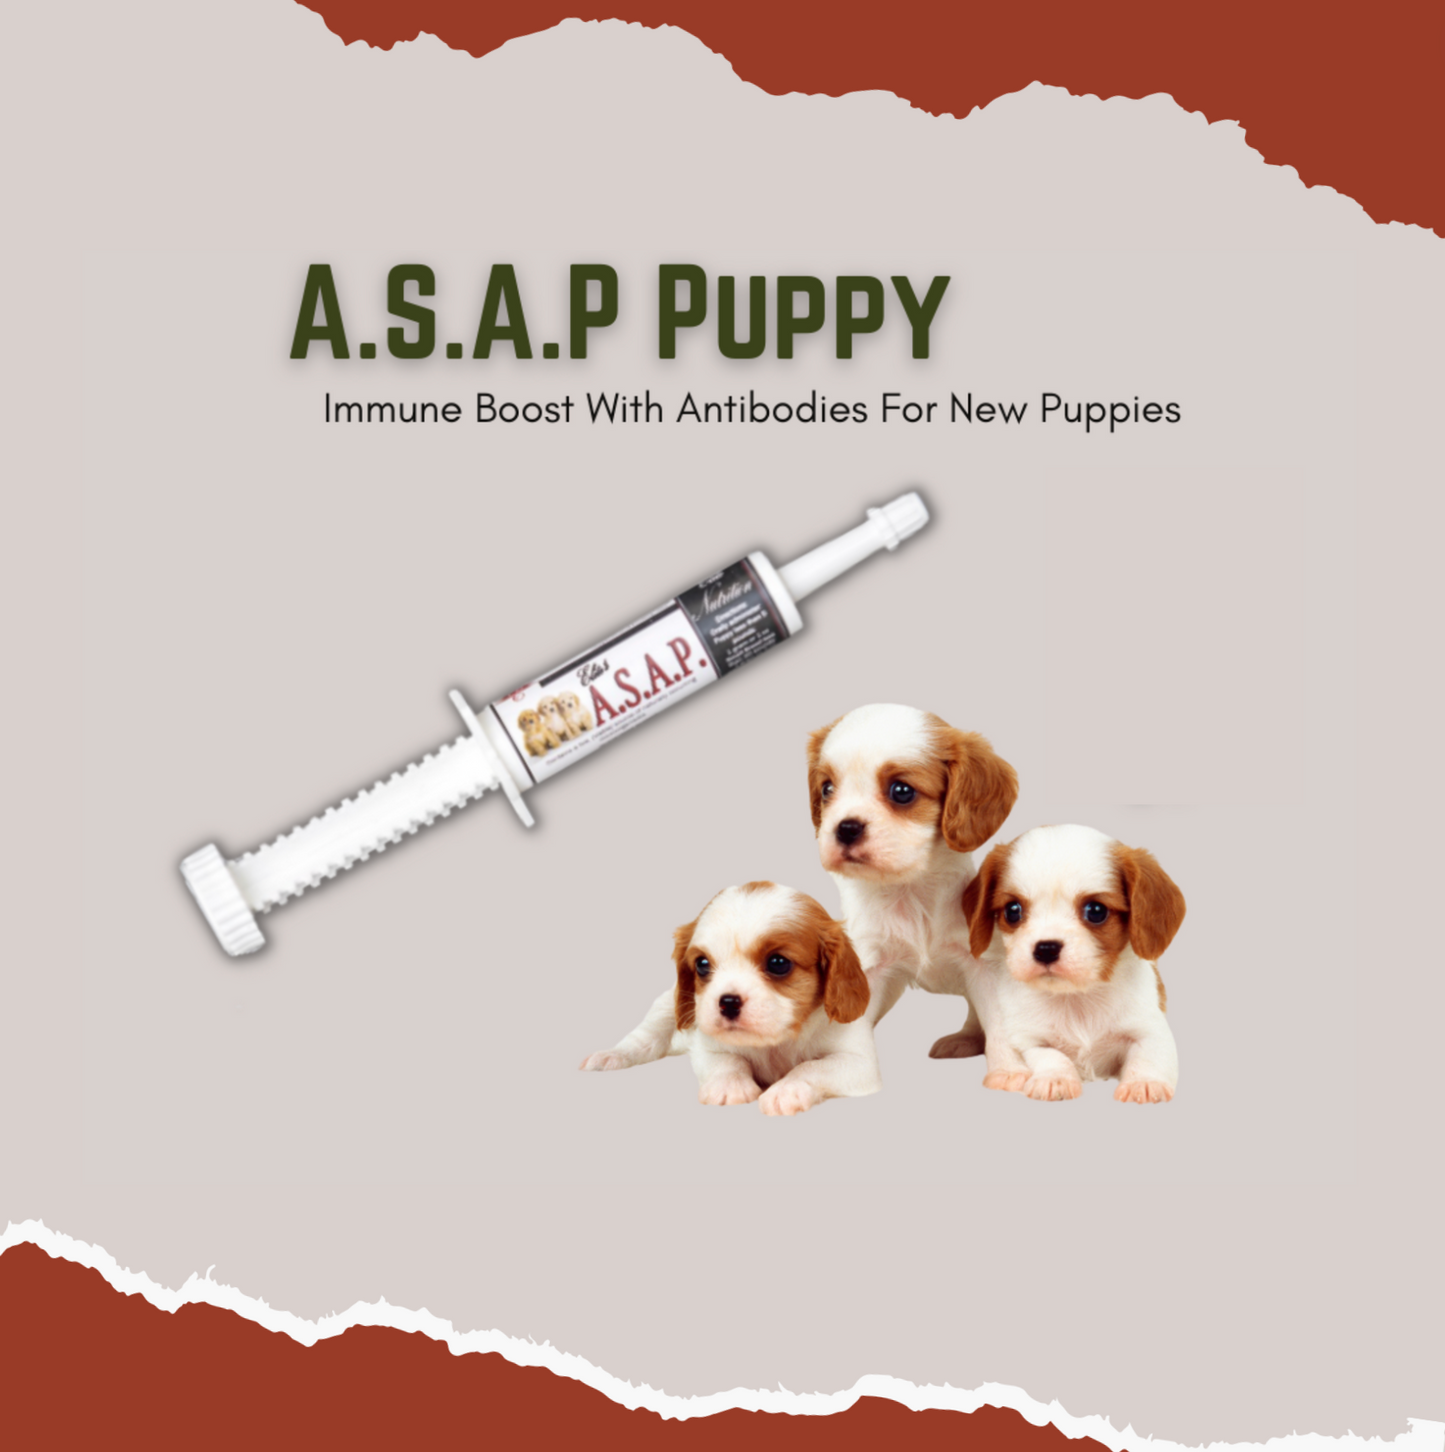 A.S.A.P - Immune Booster For New Puppies